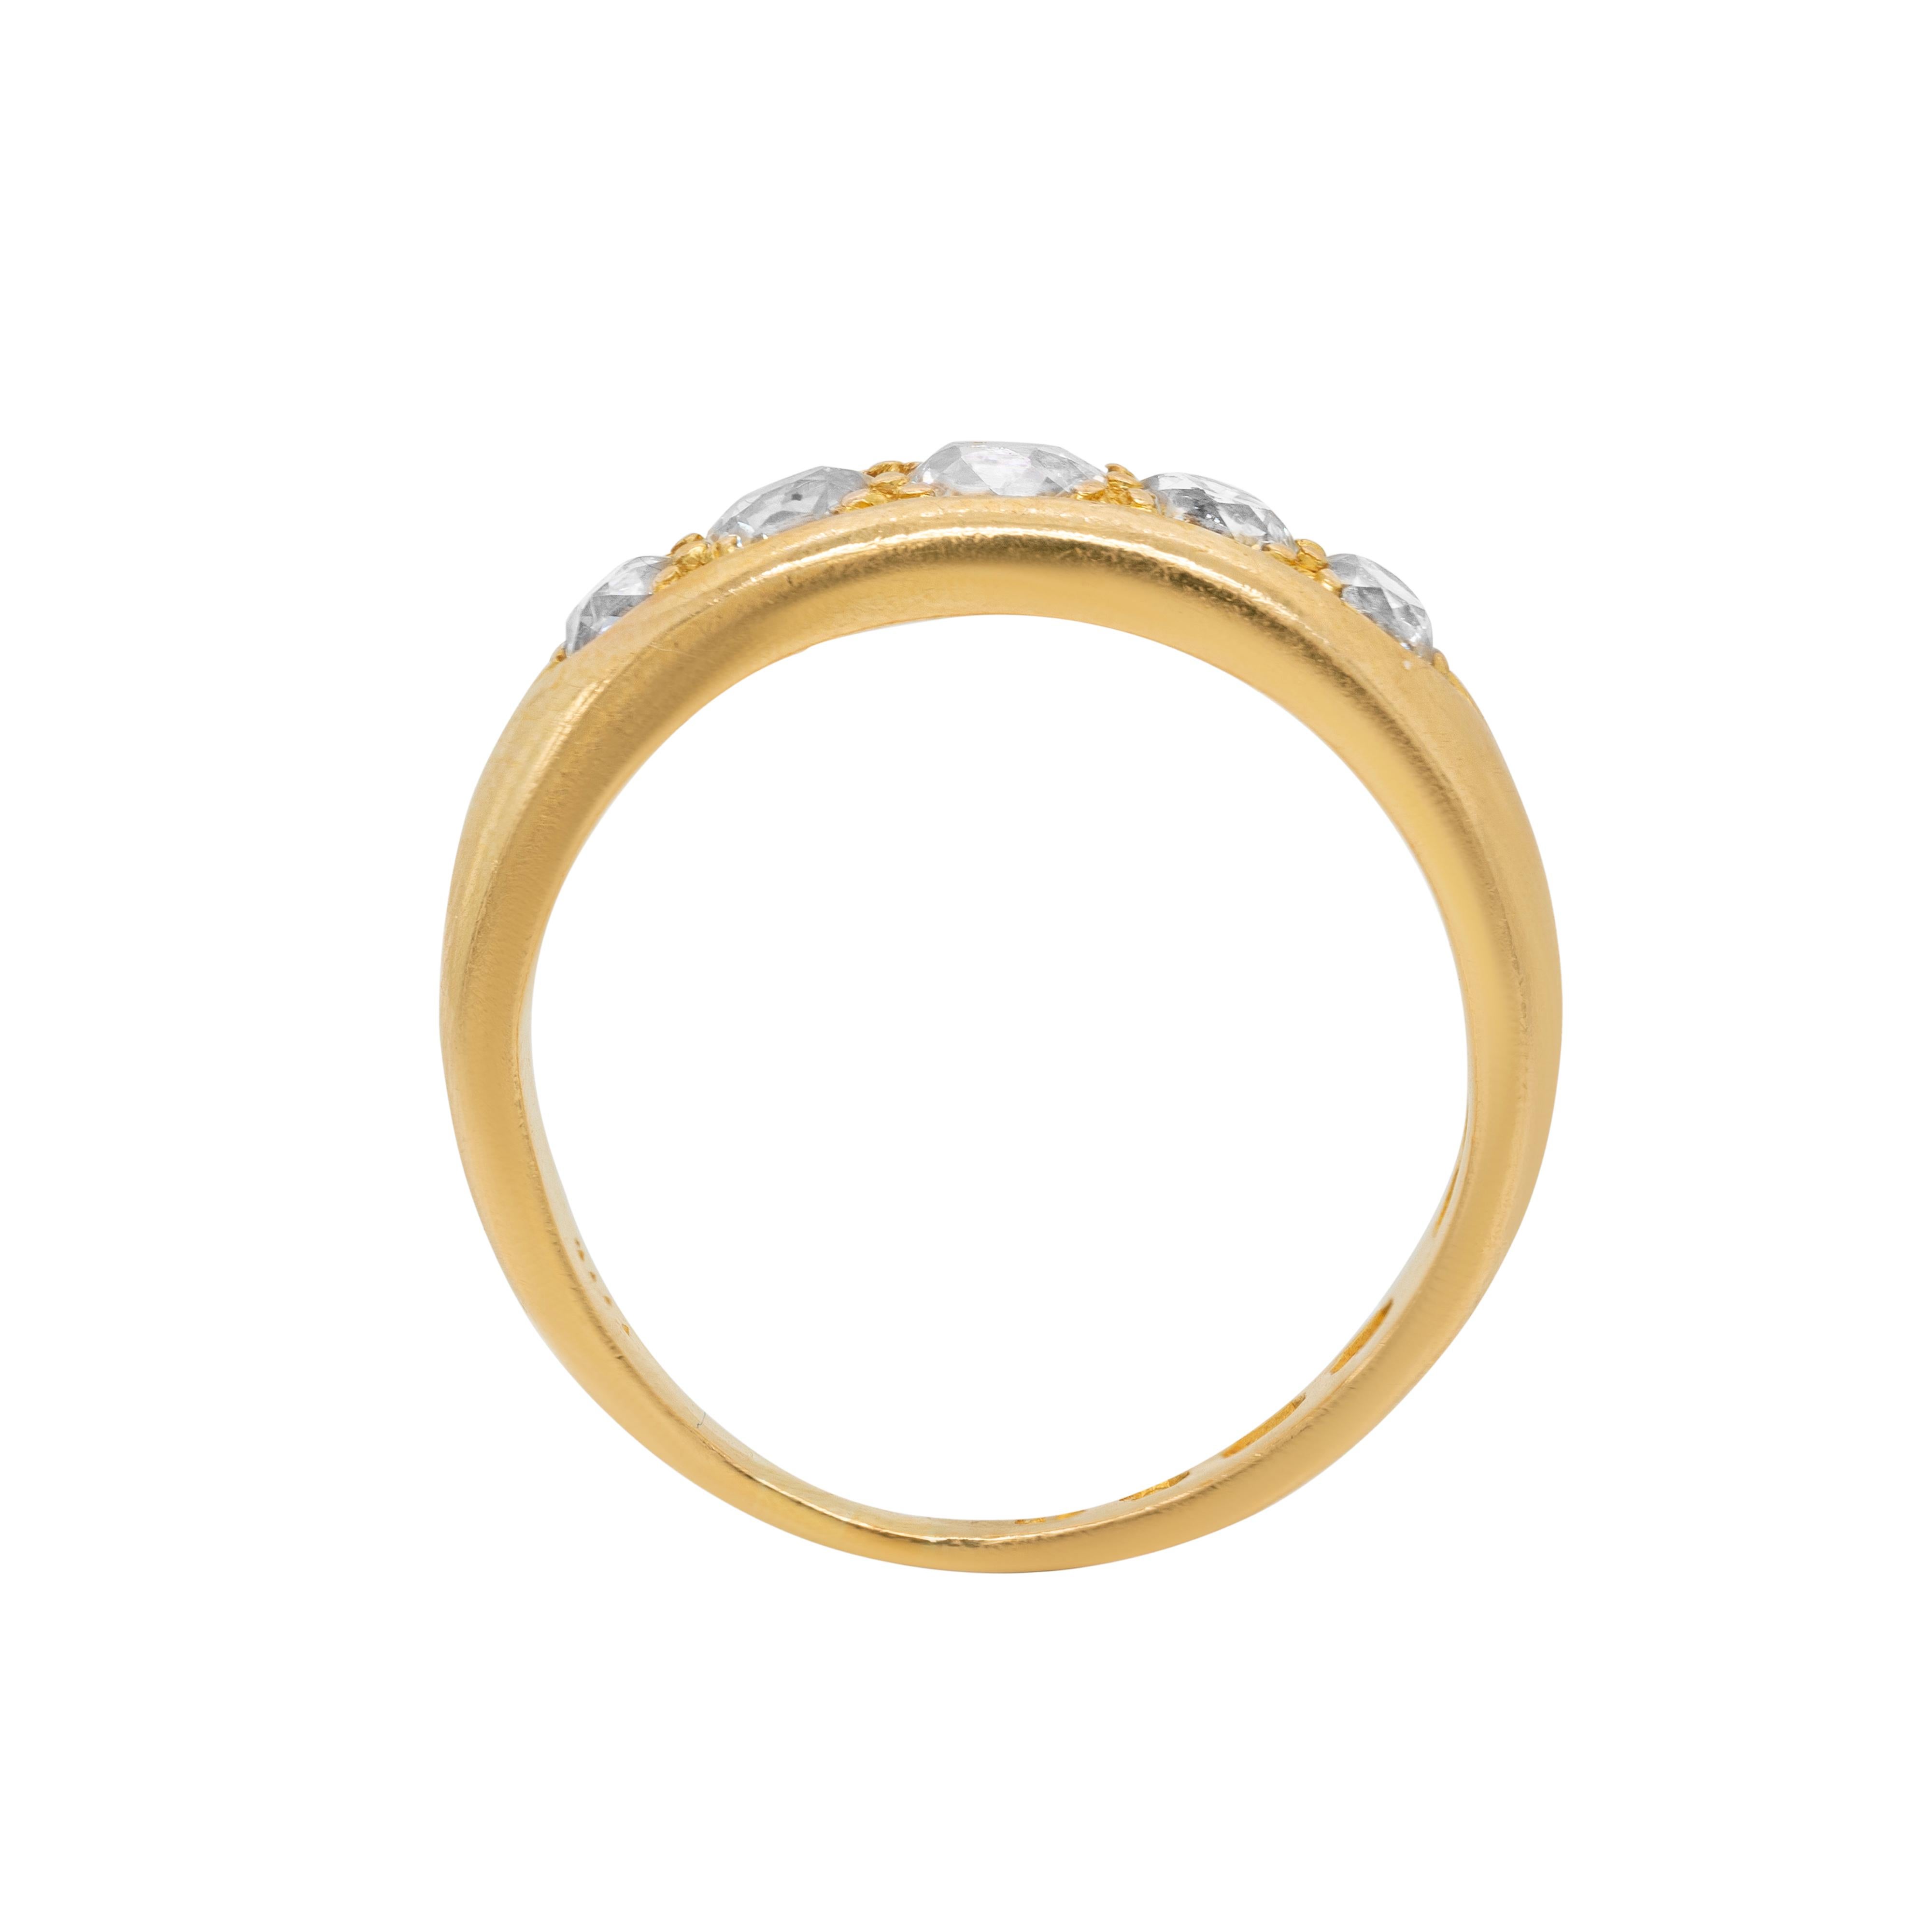 Late Victorian Antique Old Cut Diamond 18 Carat Yellow Gold Five-Stone Ring, 1886 For Sale